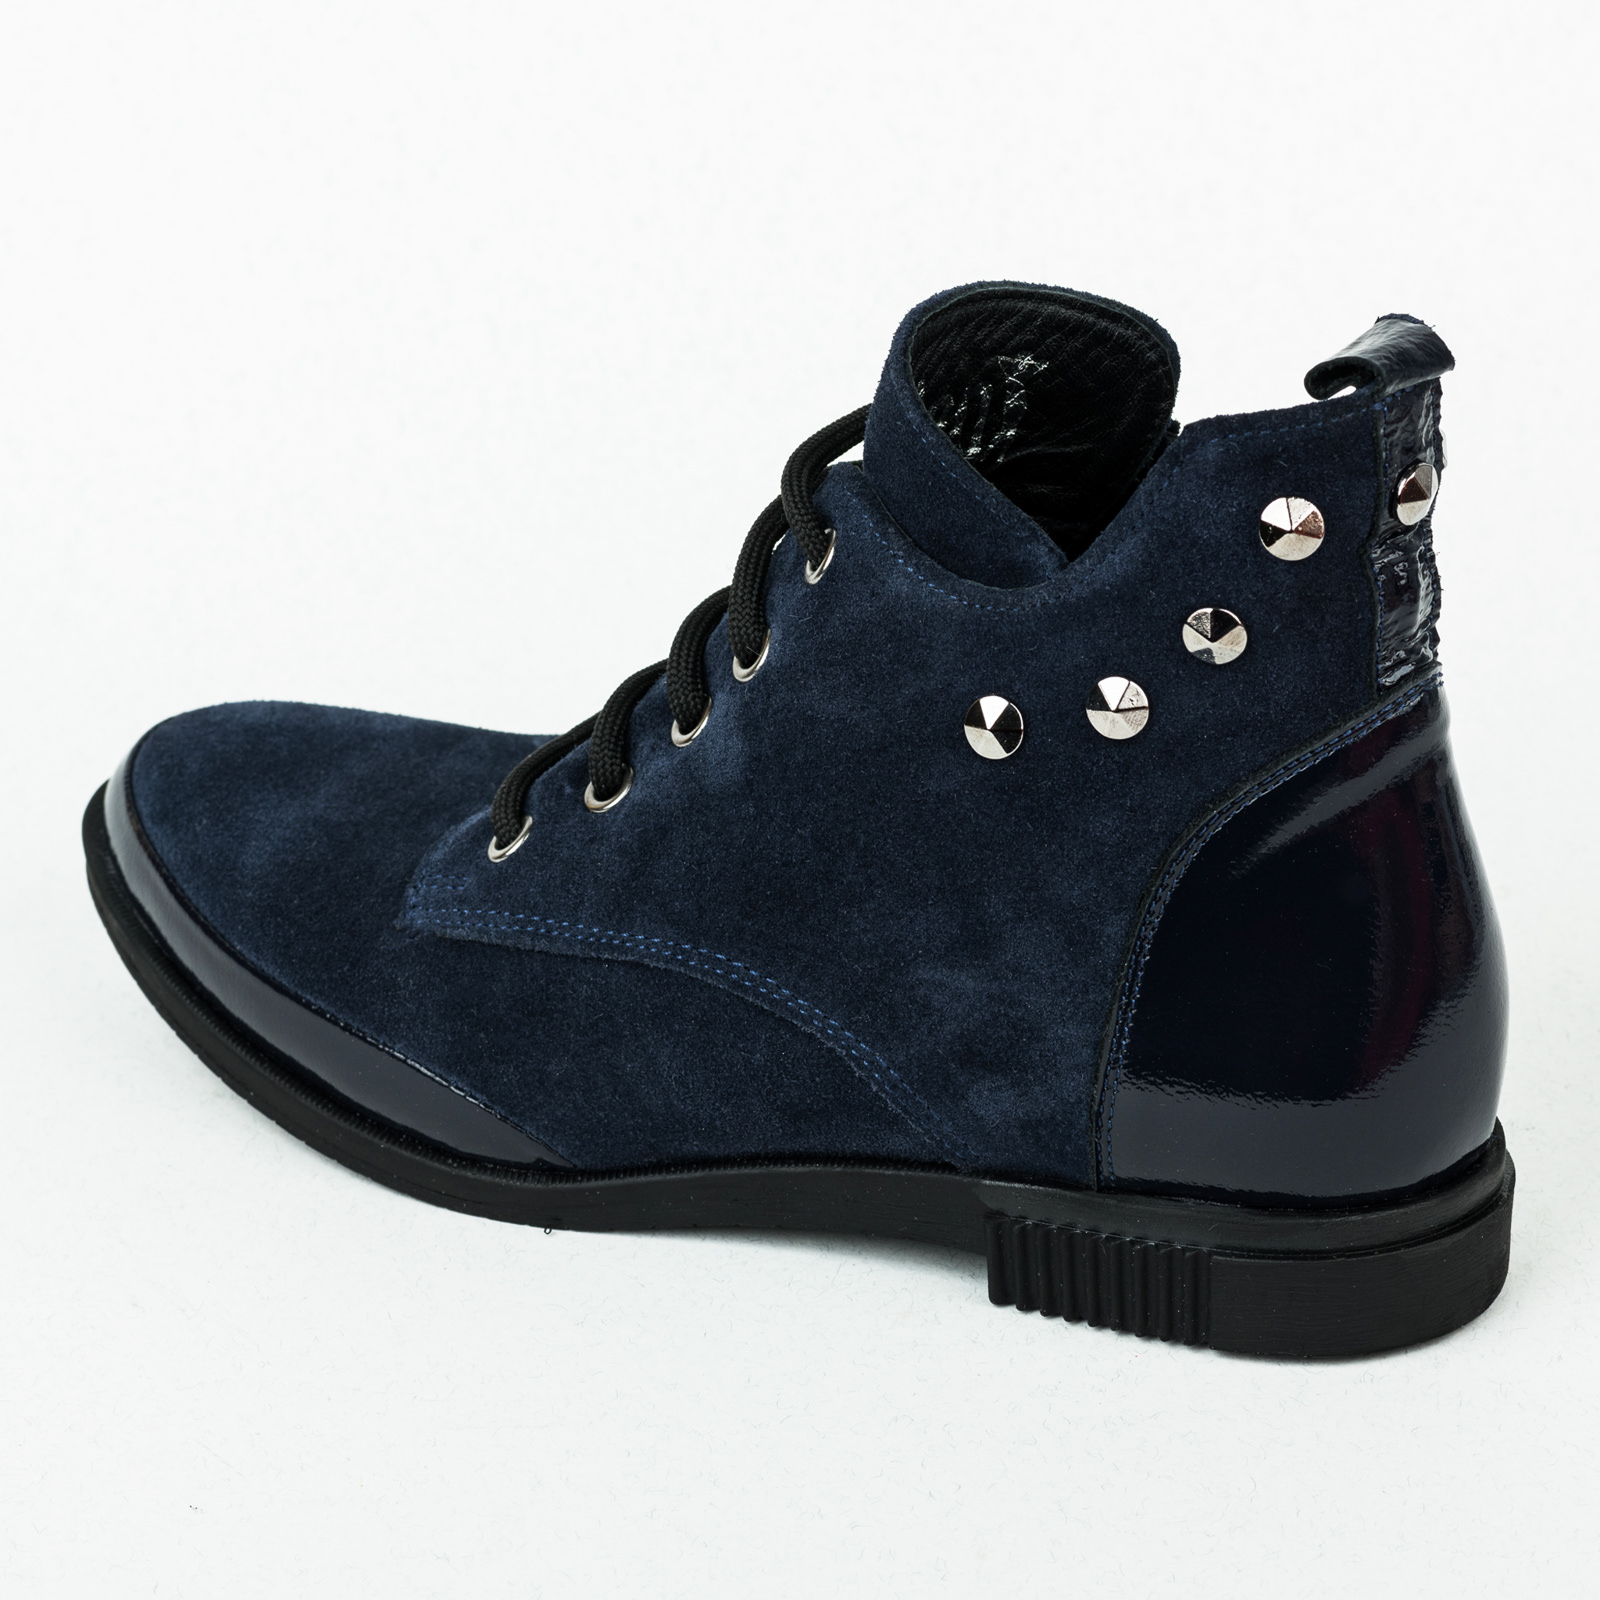 Leather ankle boots B017 - NAVY